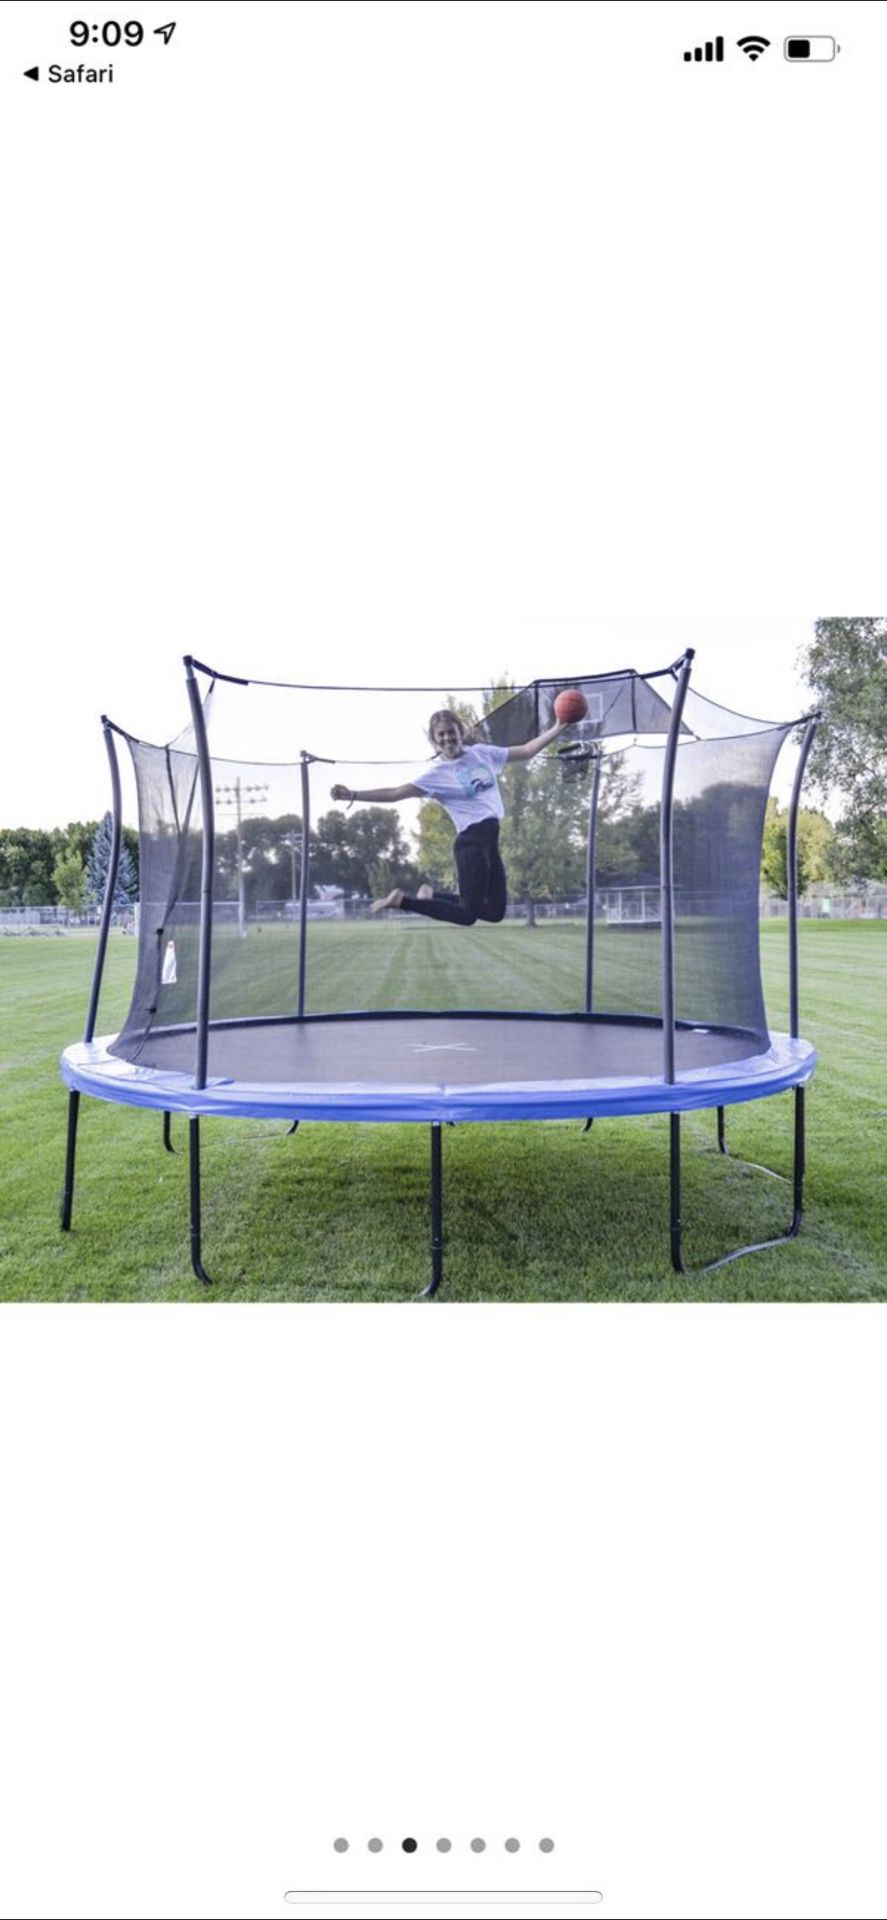 14”ft trampoline with a basketball hoop brand new in the box hurry it won’t last long!!!!